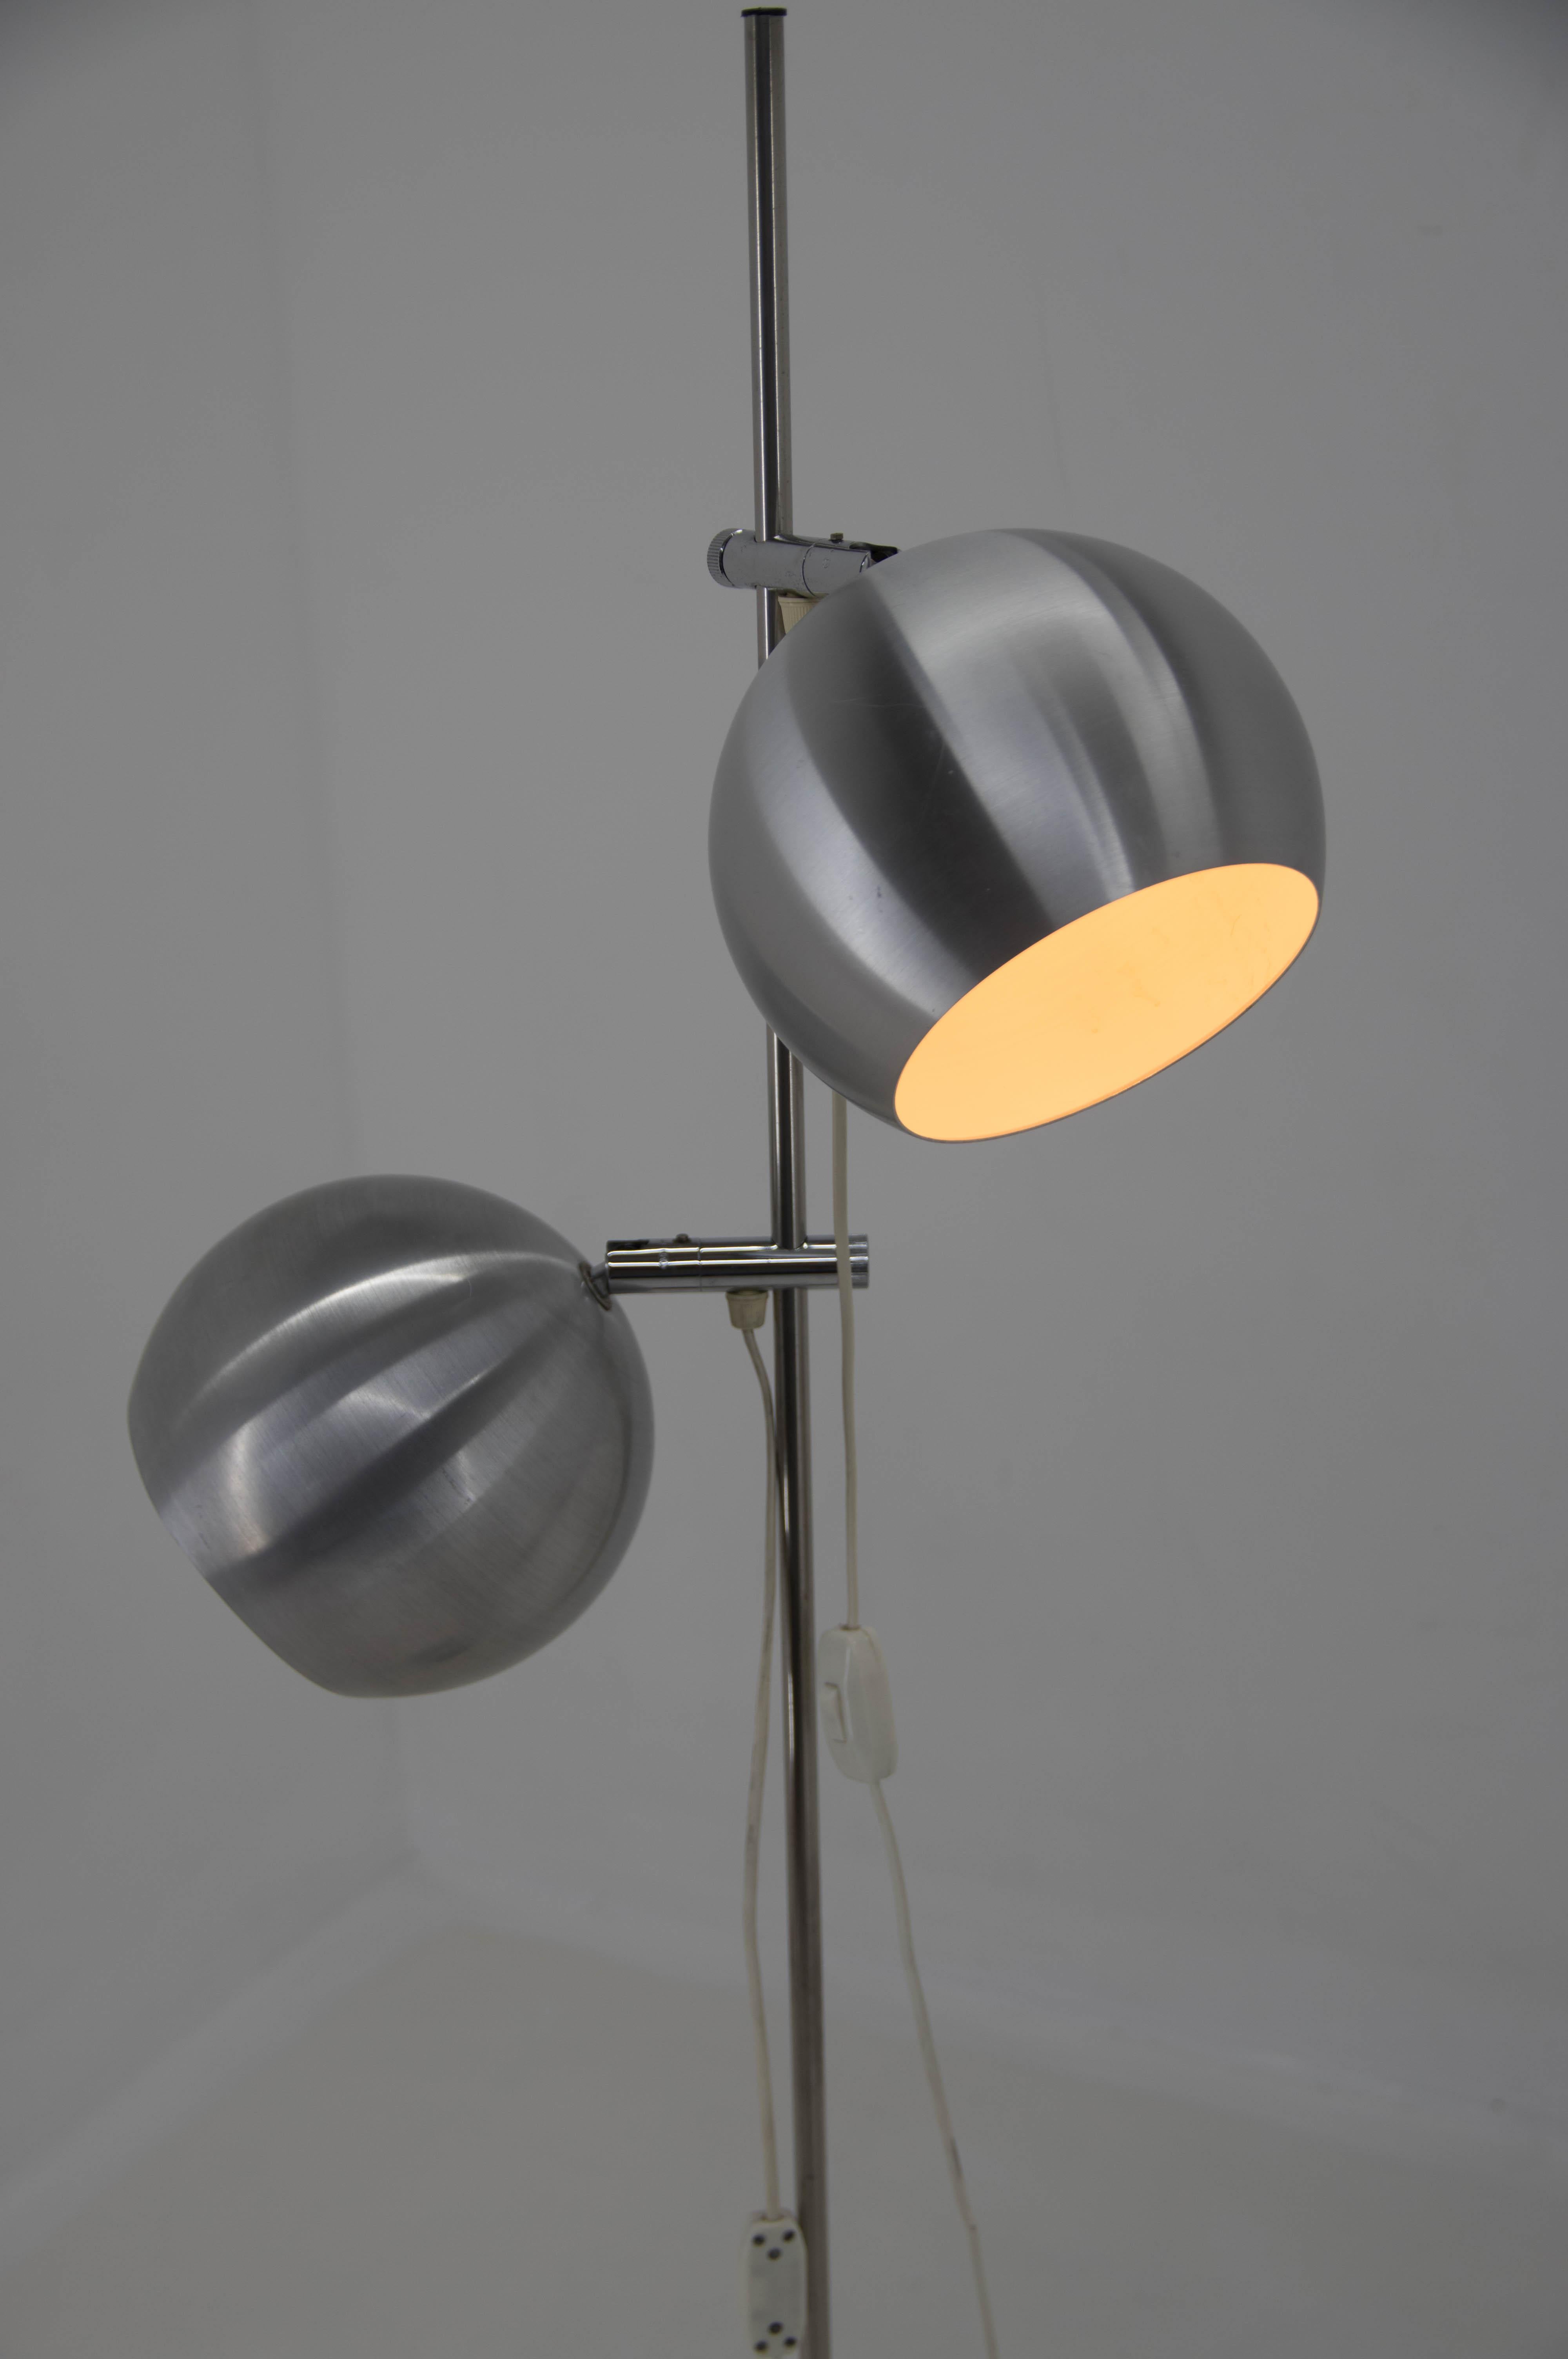 European Floor Lamp with Flexible Shades, Europe, 1960s For Sale